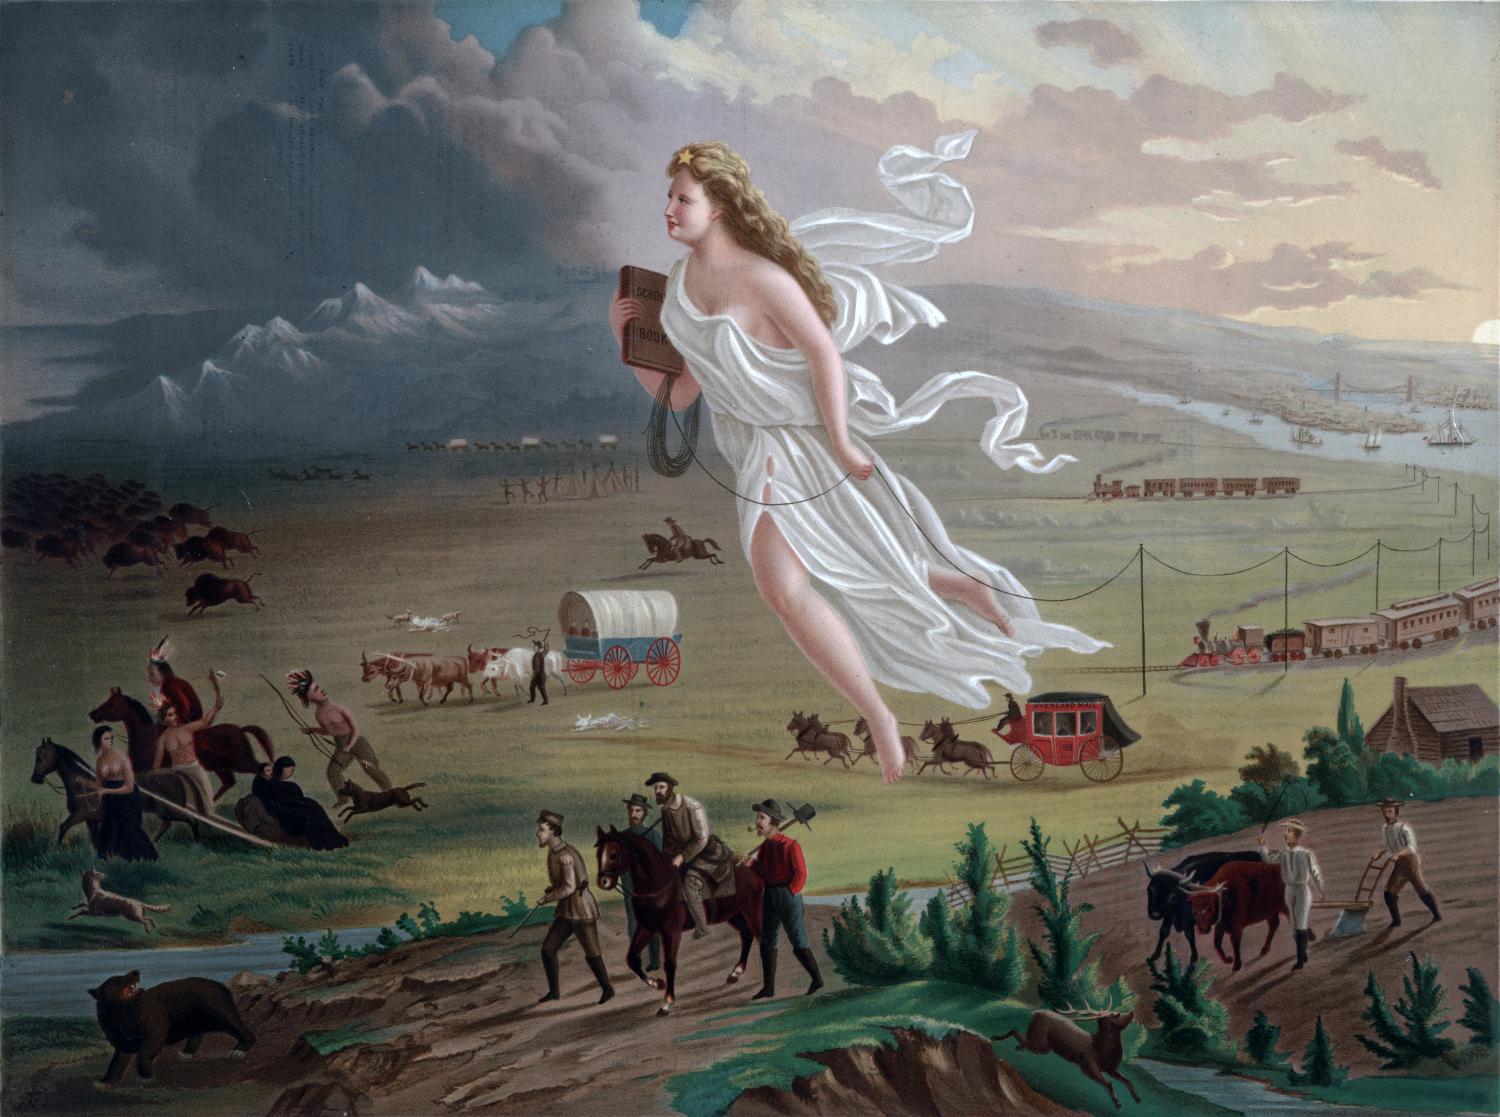 Painting shows “allegorical female figure of America leading pioneers westward, as they travel on foot, in a stagecoach, conestoga wagon, and by railroads, where they encounter Native Americans and herds of bison.”